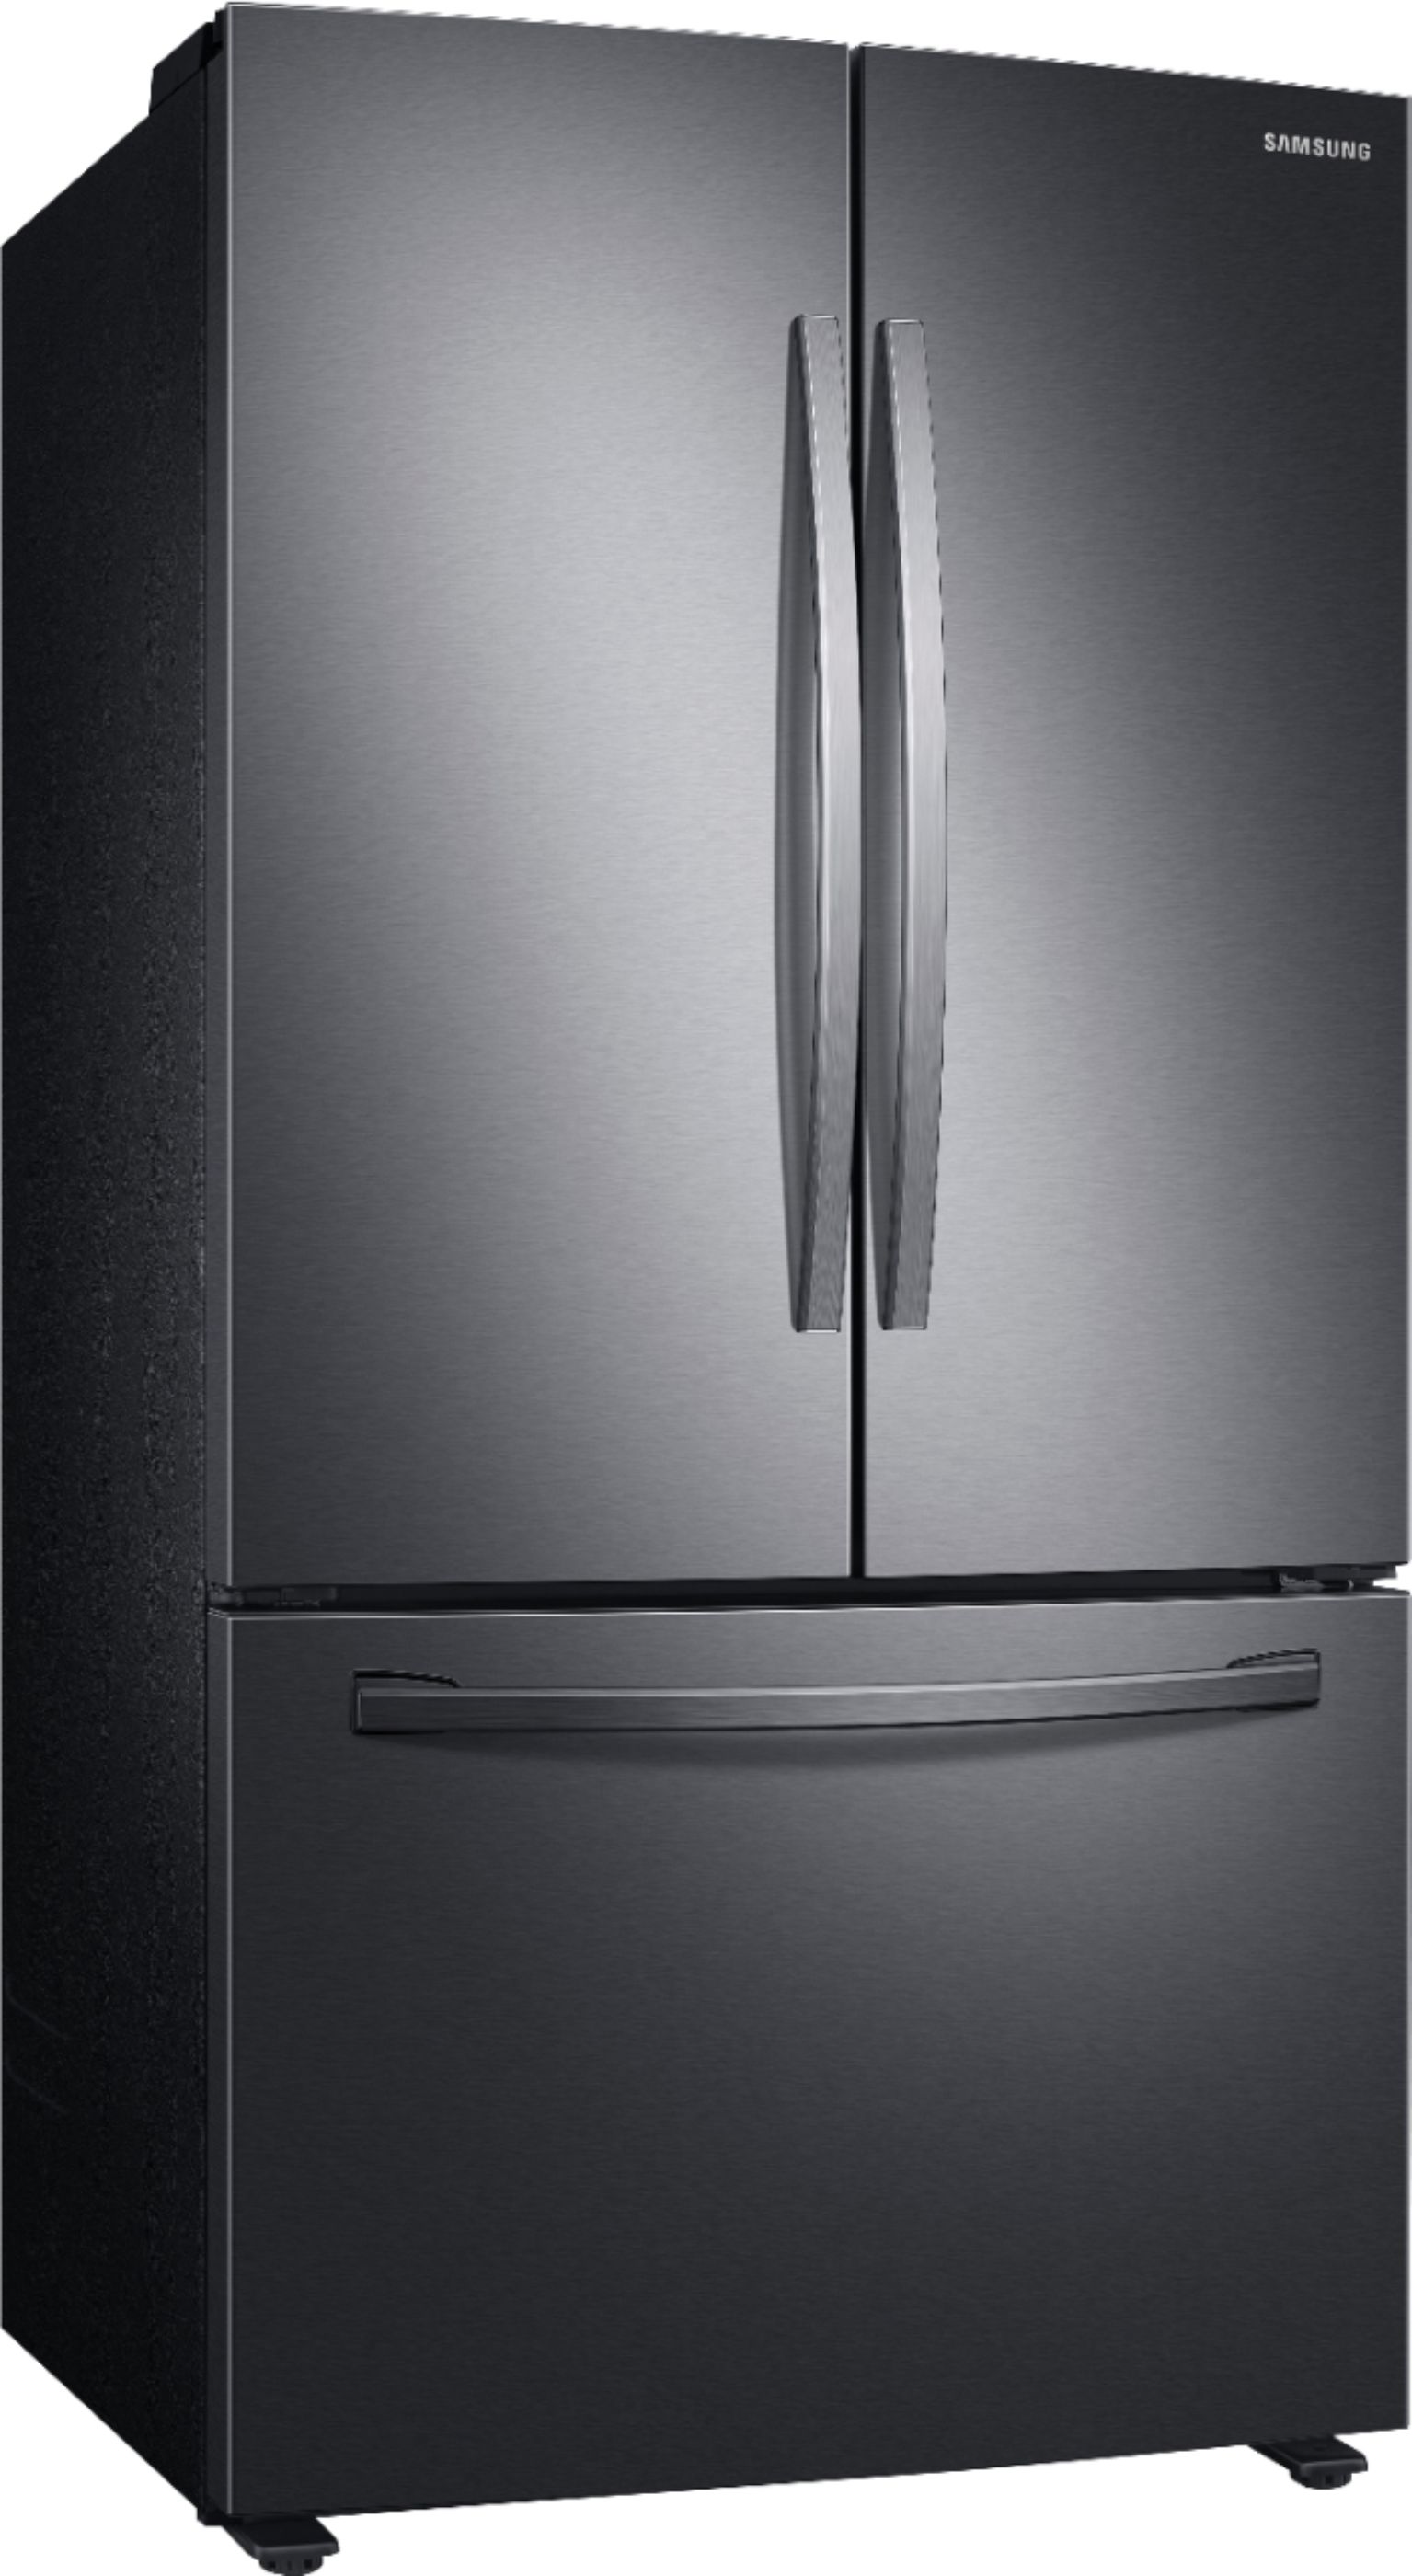 Angle View: Samsung - 17.3 Cu. Ft. Kimchi & Specialty 4-Door French Door Refrigerator with WiFi and Super Precise Cooling - Platinum Bronze